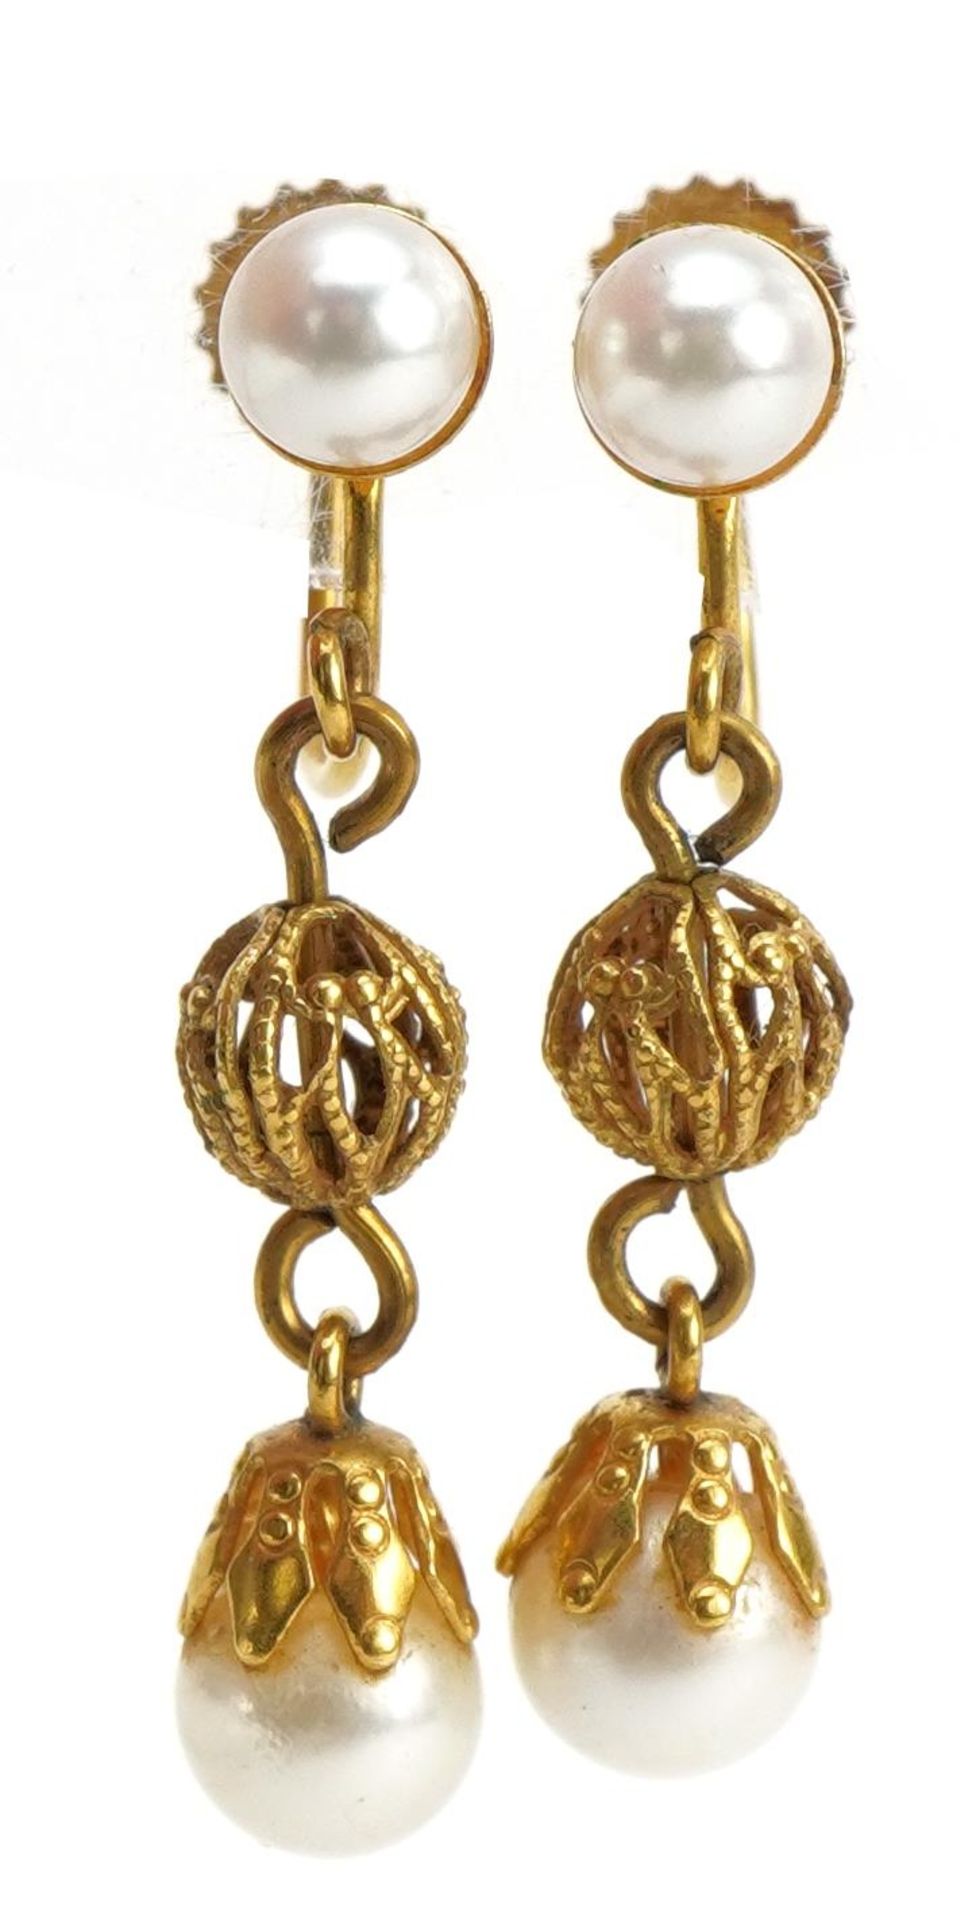 Pair of 9ct gold pearl drop earrings with screw backs, 3.1cm high, 2.5g